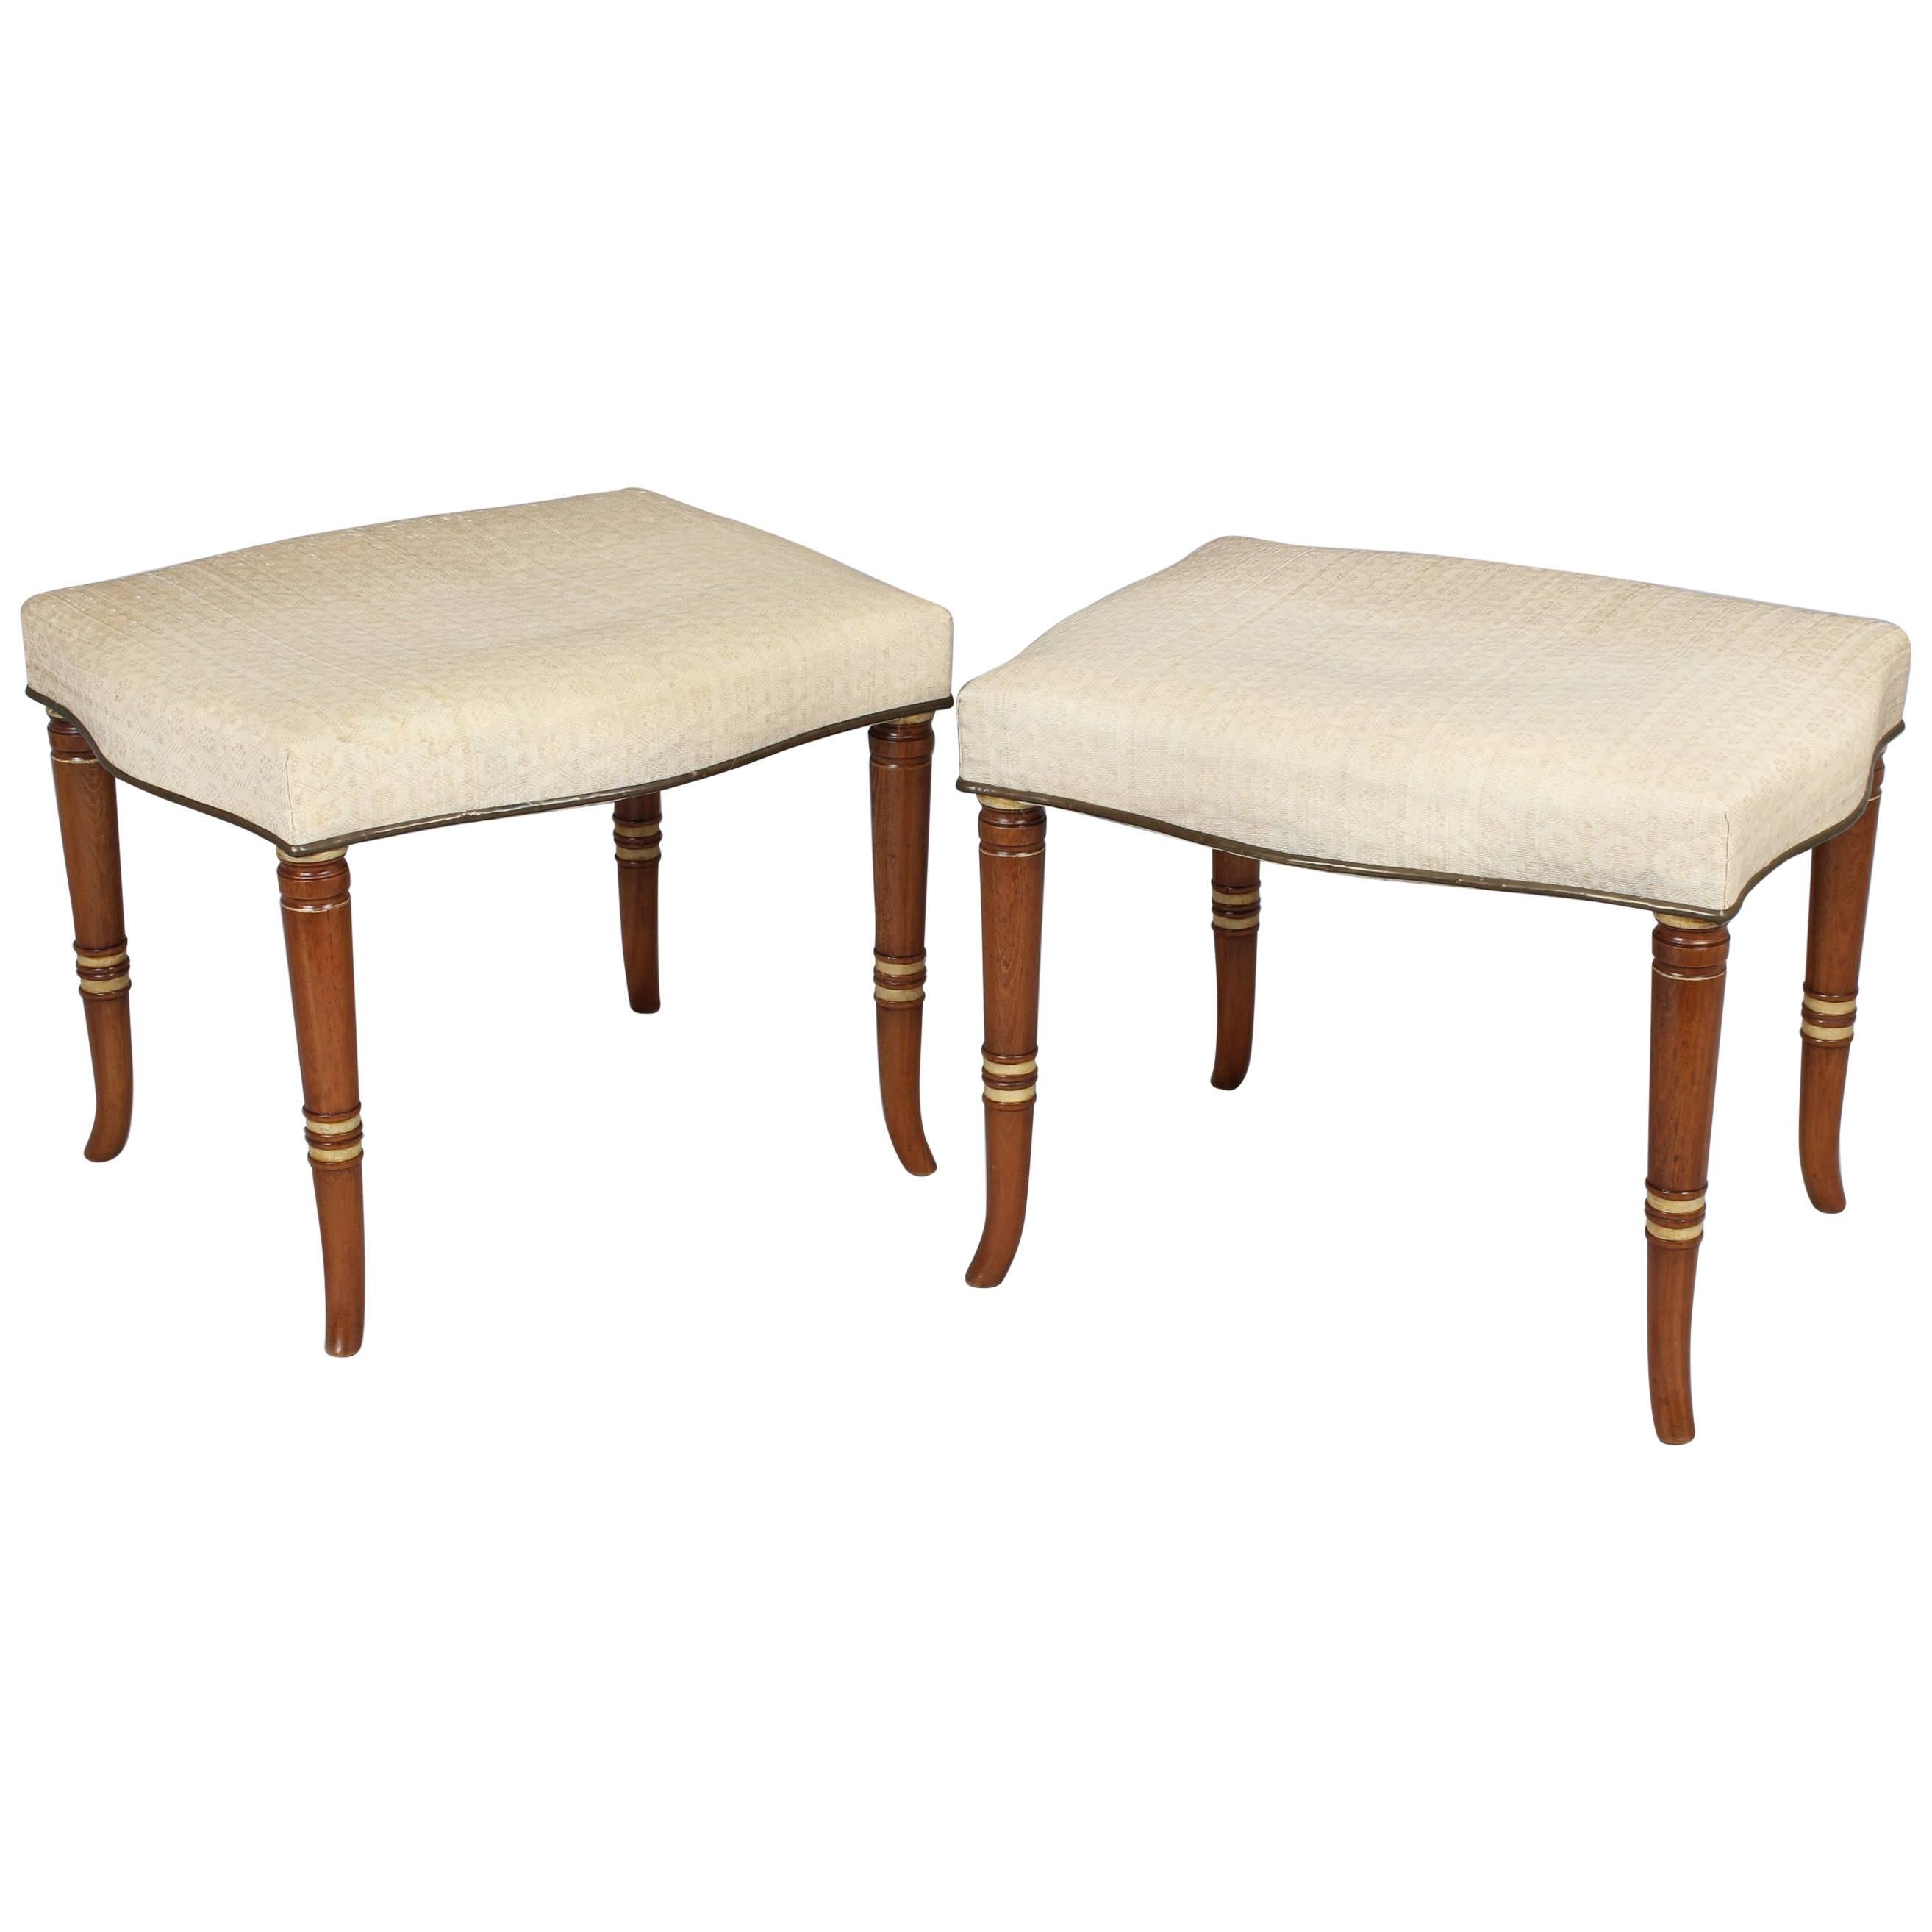 Pair of Early 19th Century Continental Stools For Sale